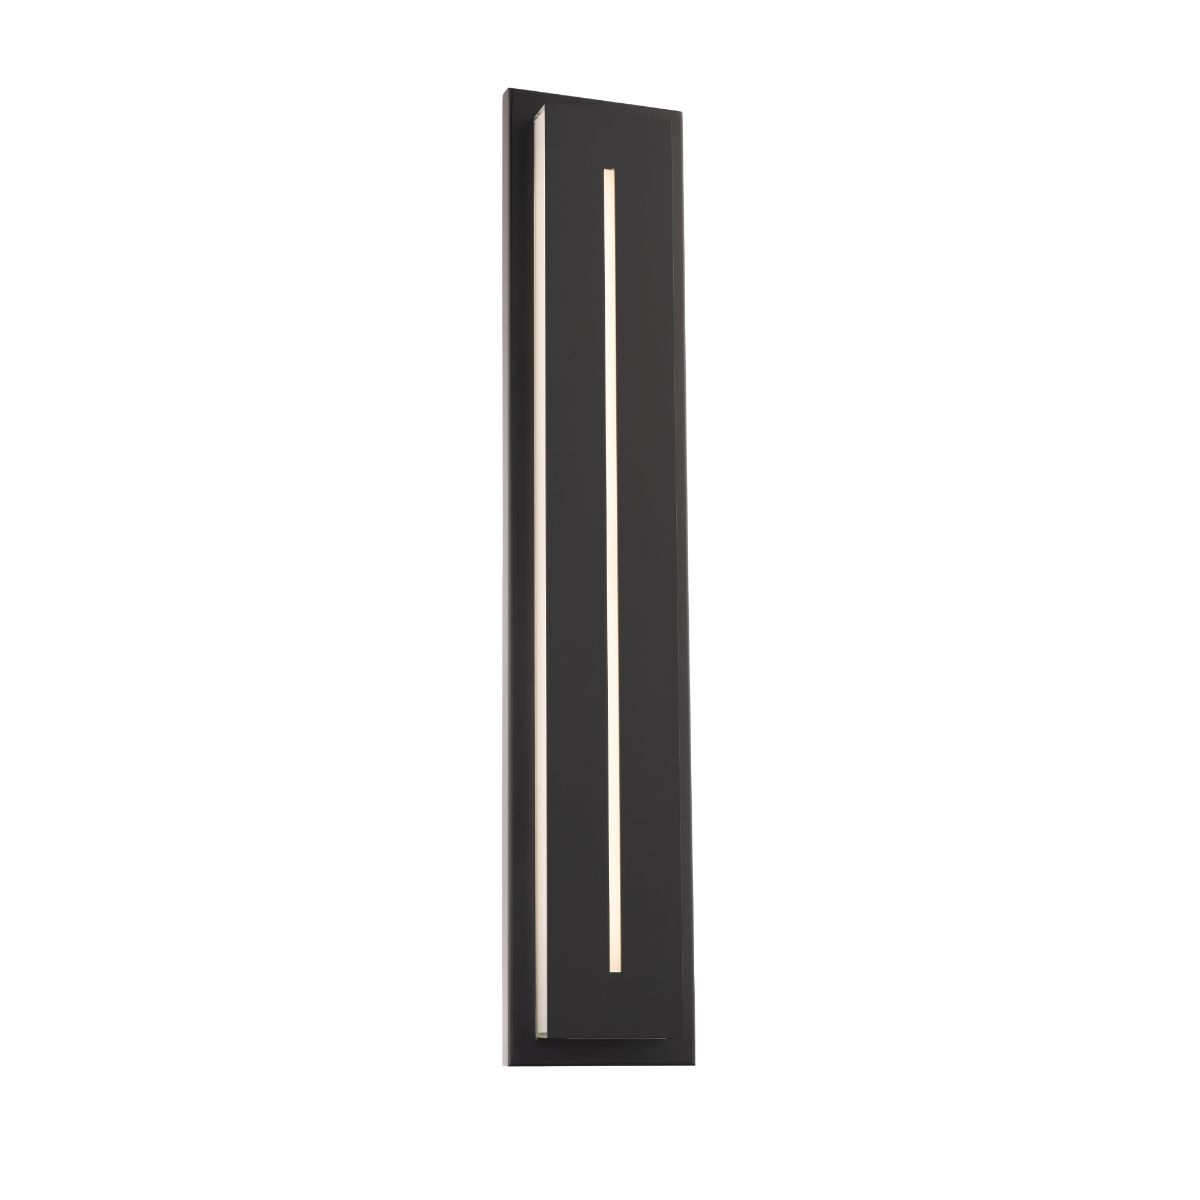 Midnight 36 In. LED Outdoor Wall Sconce 4000K Black Finish